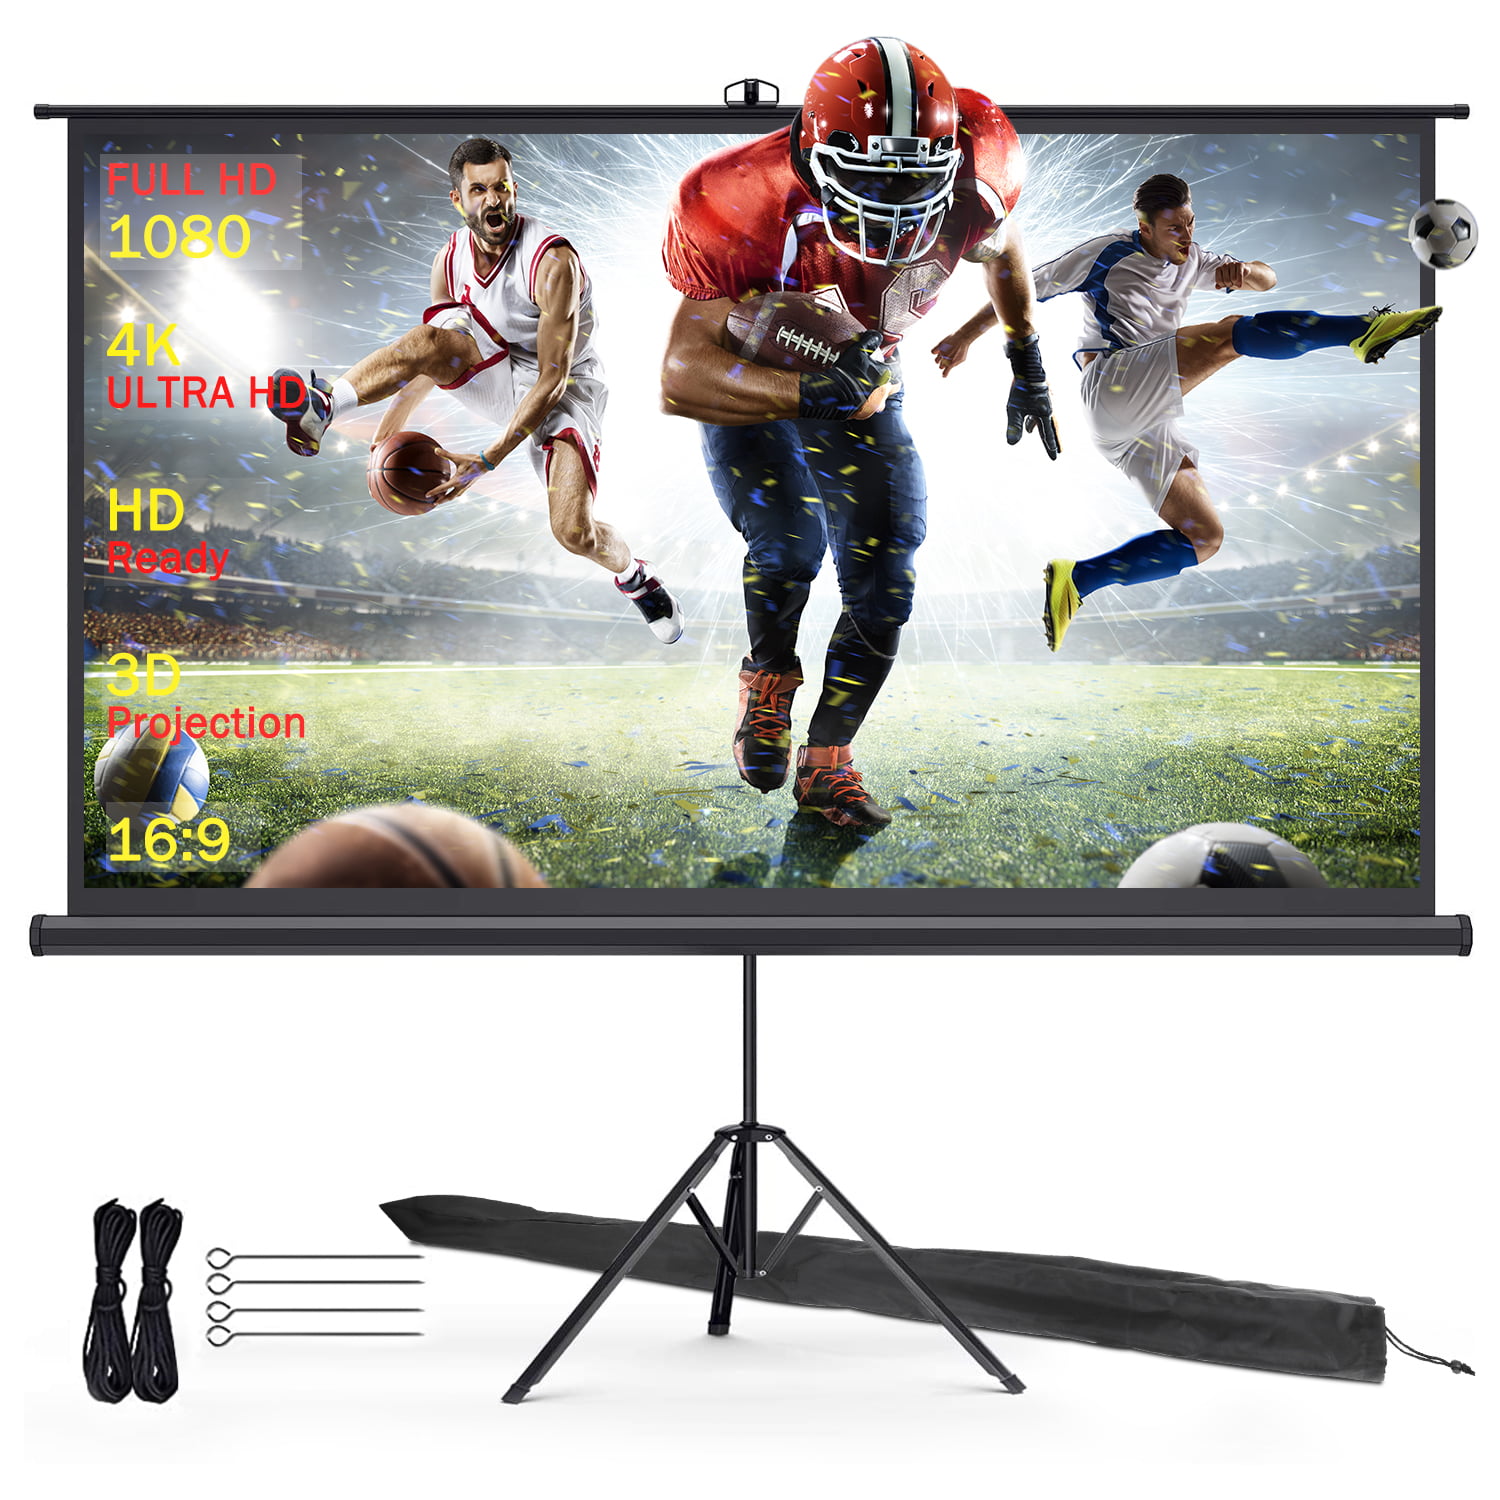 Giny Projector Screen Portable for Outdoor Camping Outdoor Movies for Home Theater Movies 3D Film Screen Curtains 100in 